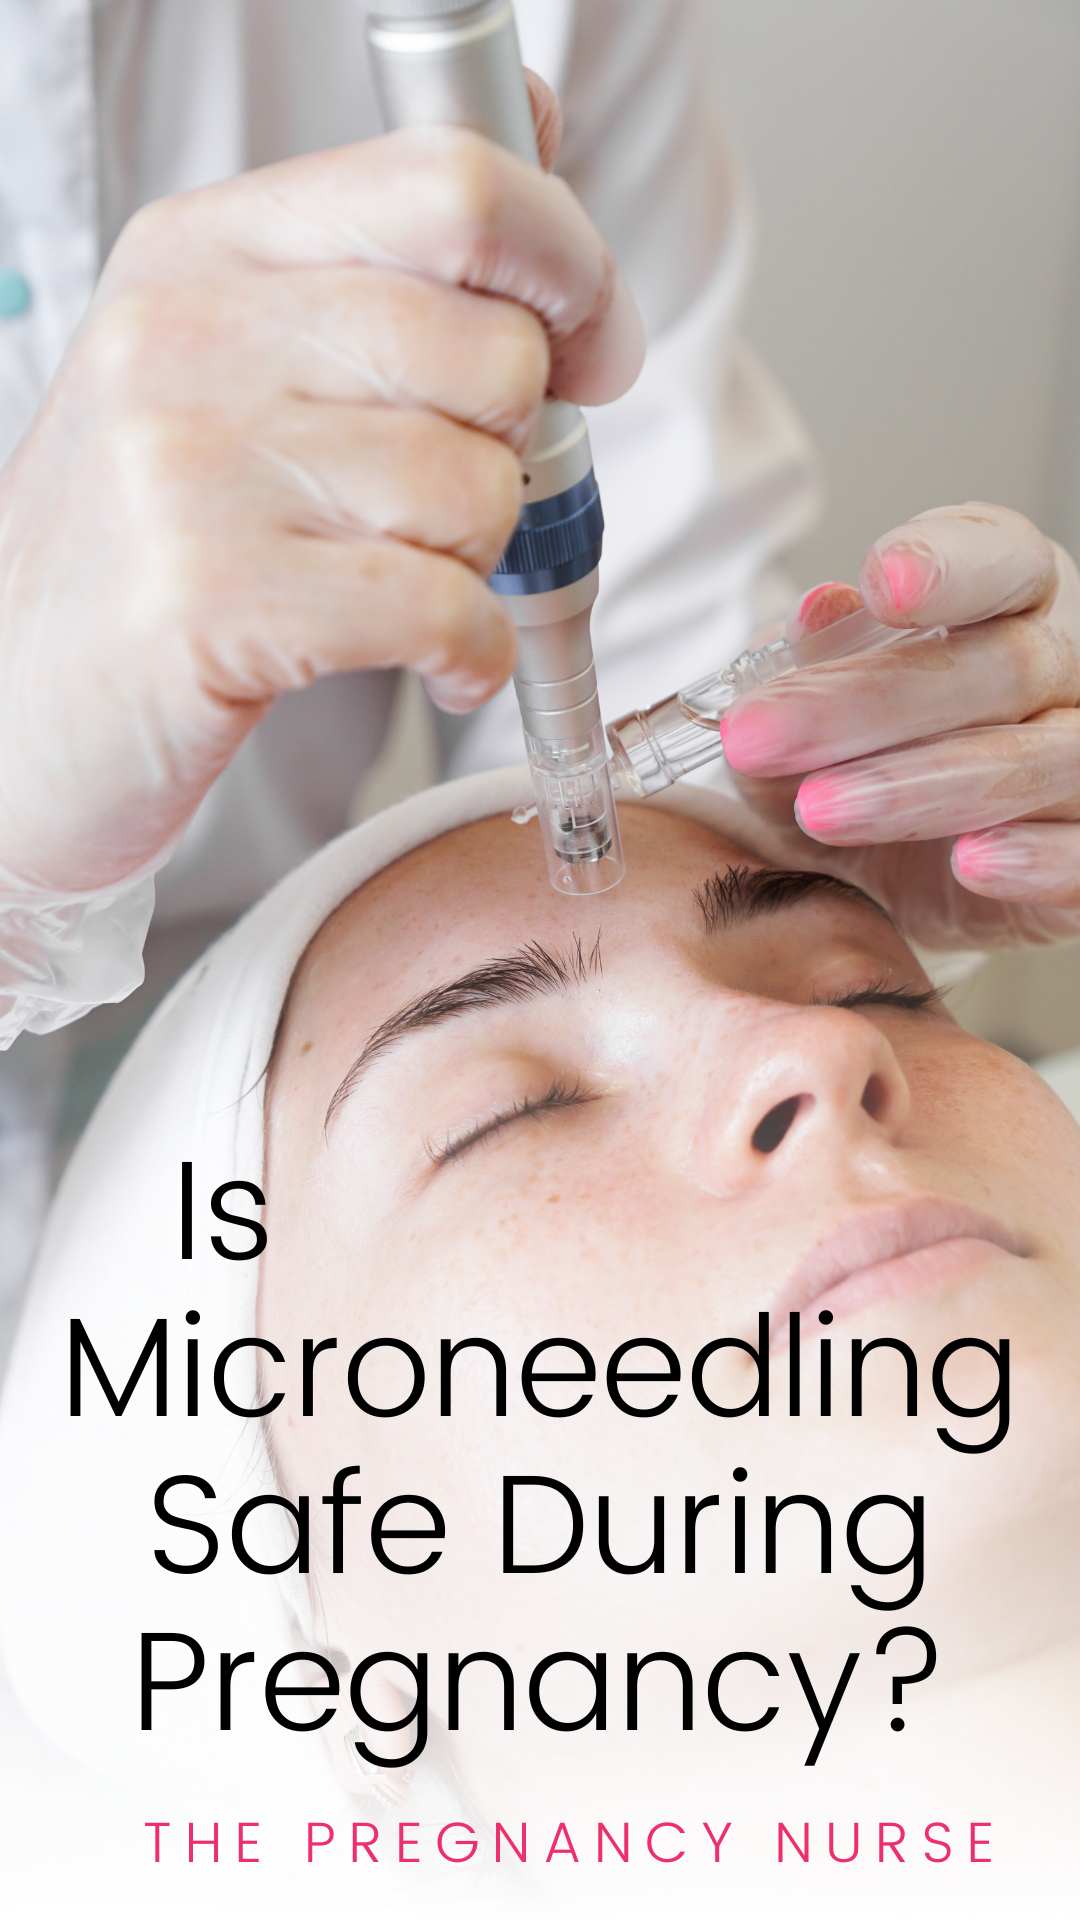 As a pregnant woman, you're likely filled with a million questions. Can I dye my hair? Can I have a glass of wine? And, can I do microneedling? The answer to that last question is: maybe. Microneedling is a minimally invasive beauty treatment that involves using tiny needles to create micro-injuries in the skin. While there's limited research on the safety of microneedling during pregnancy, many experts believe it's safe to do as long as you avoid certain areas of your body. Keep reading to learn more about microneedling during pregnancy and how to stay safe while getting this popular treatment.